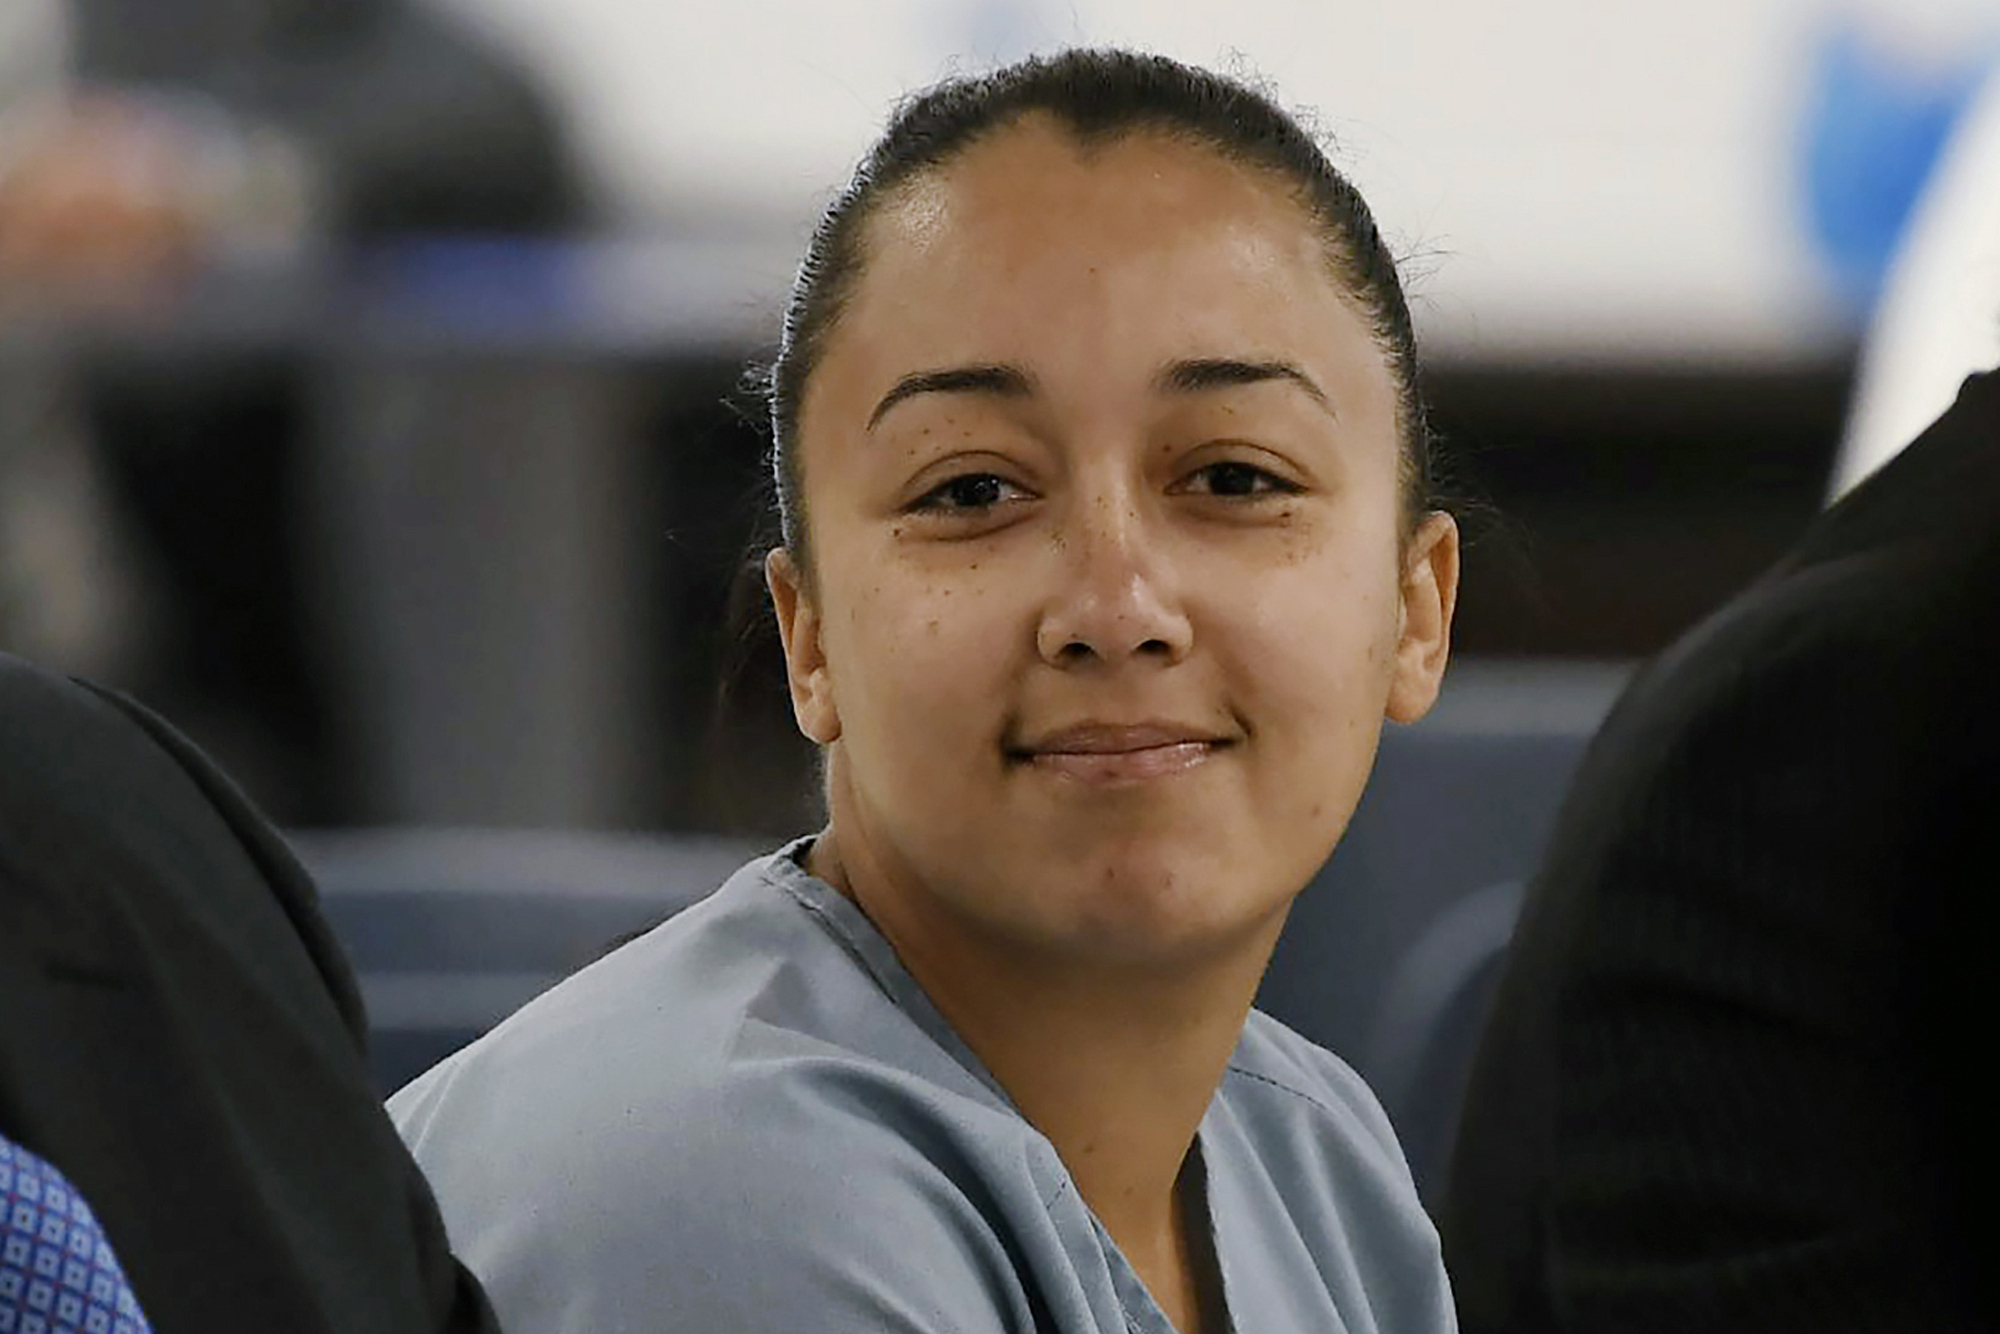 Cyntoia Brown A Sex Trafficking Survivor Has Been Released From 9537